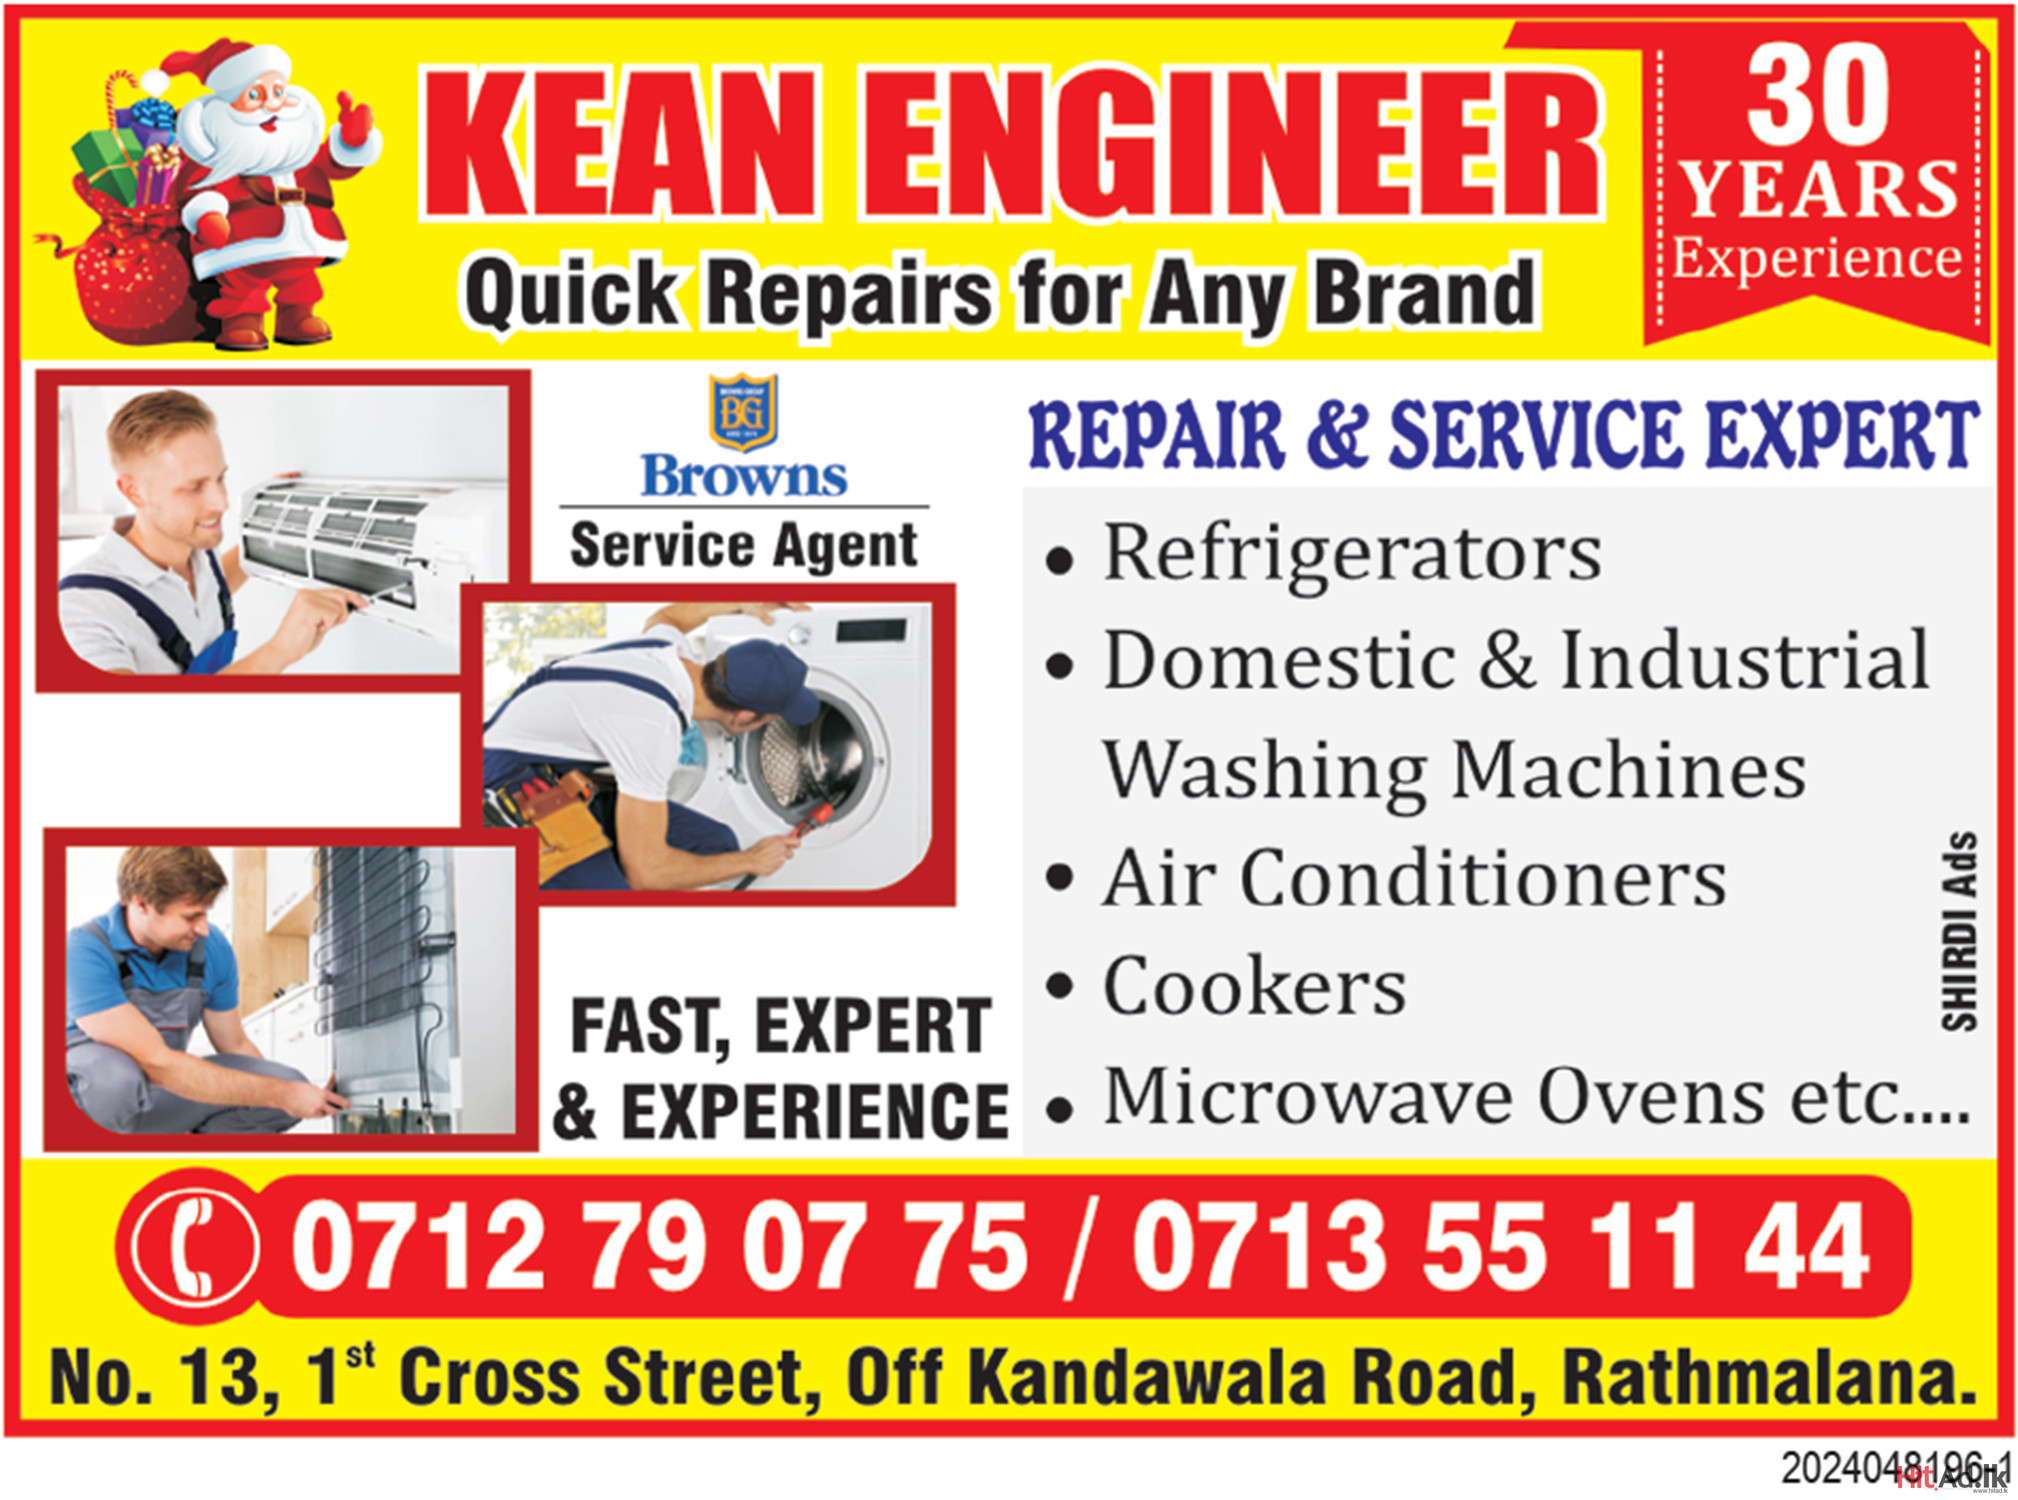 Kean Engineer Vars Experience Quick Repairs for Any Brand